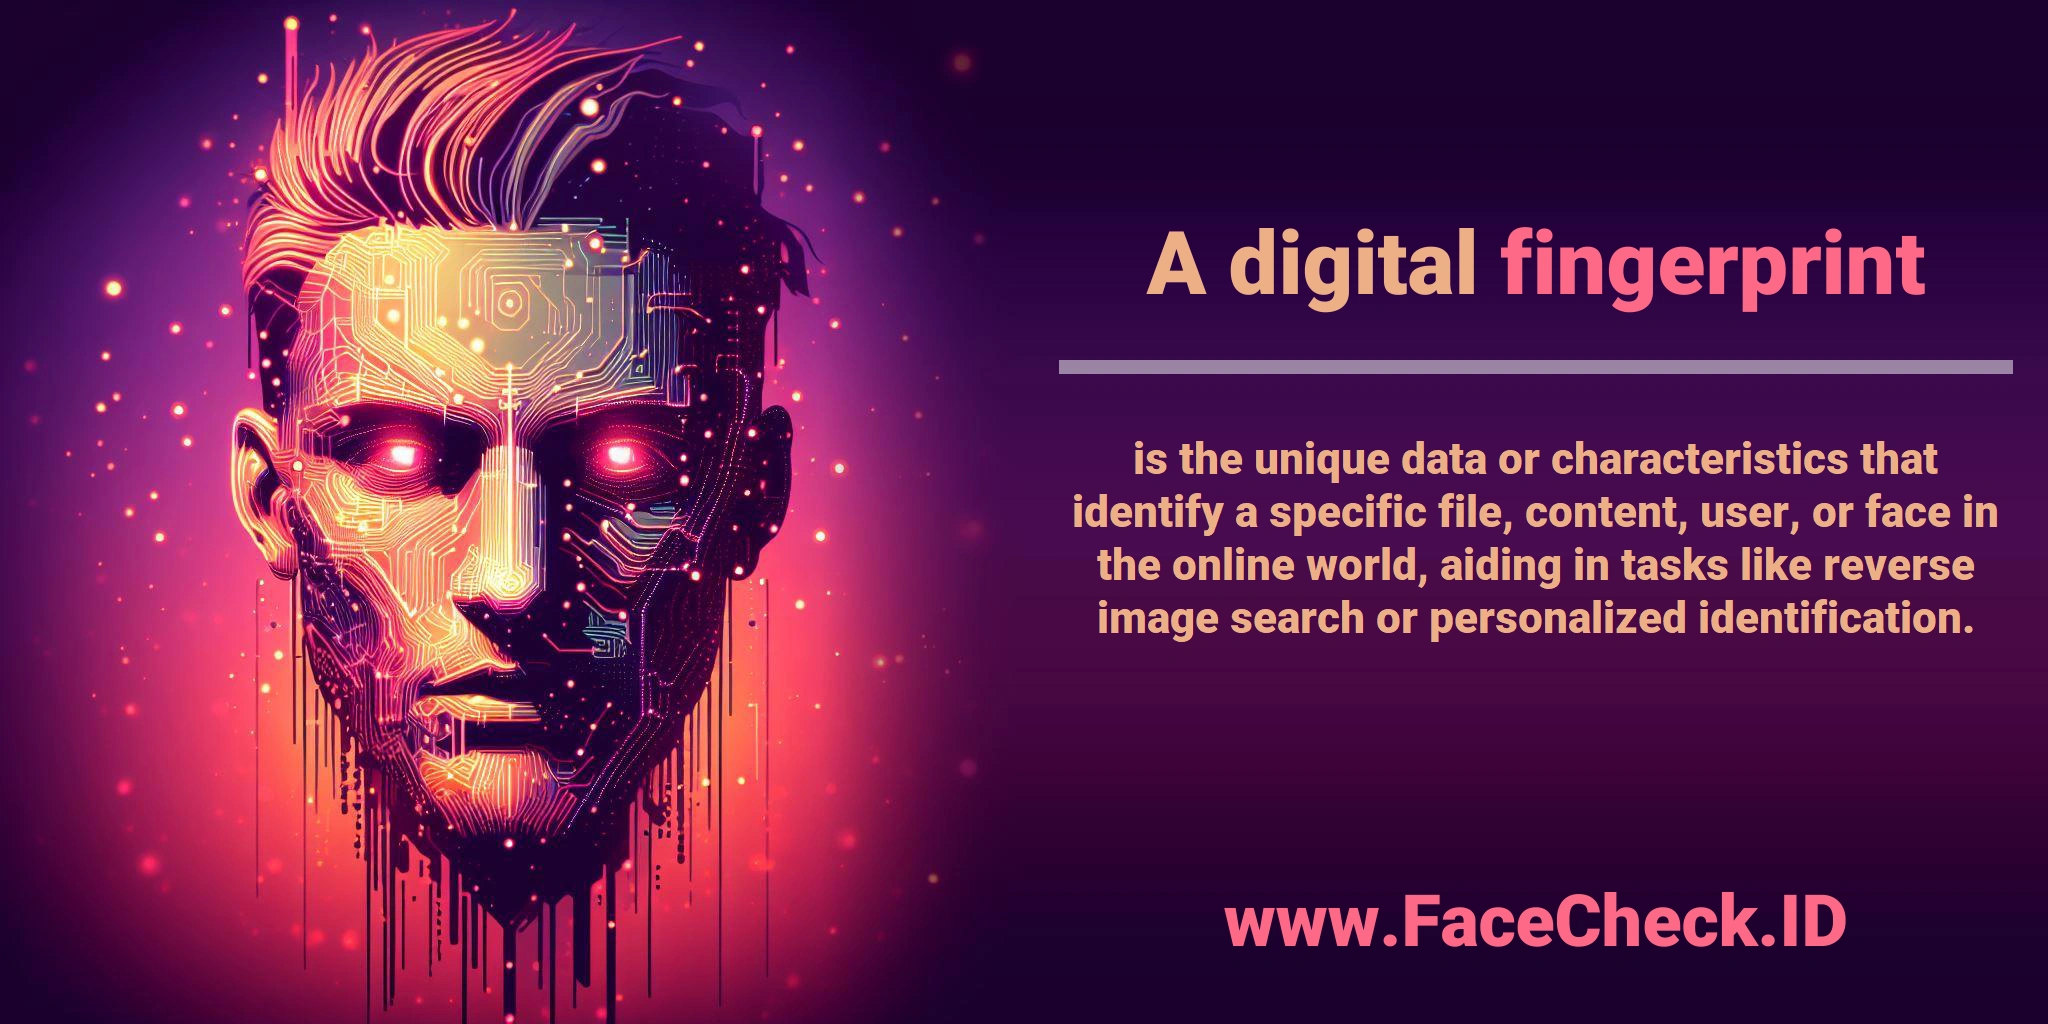 A digital <b>fingerprint</b> is the unique data or characteristics that identify a specific file, content, user, or face in the online world, aiding in tasks like reverse image search or personalized identification.